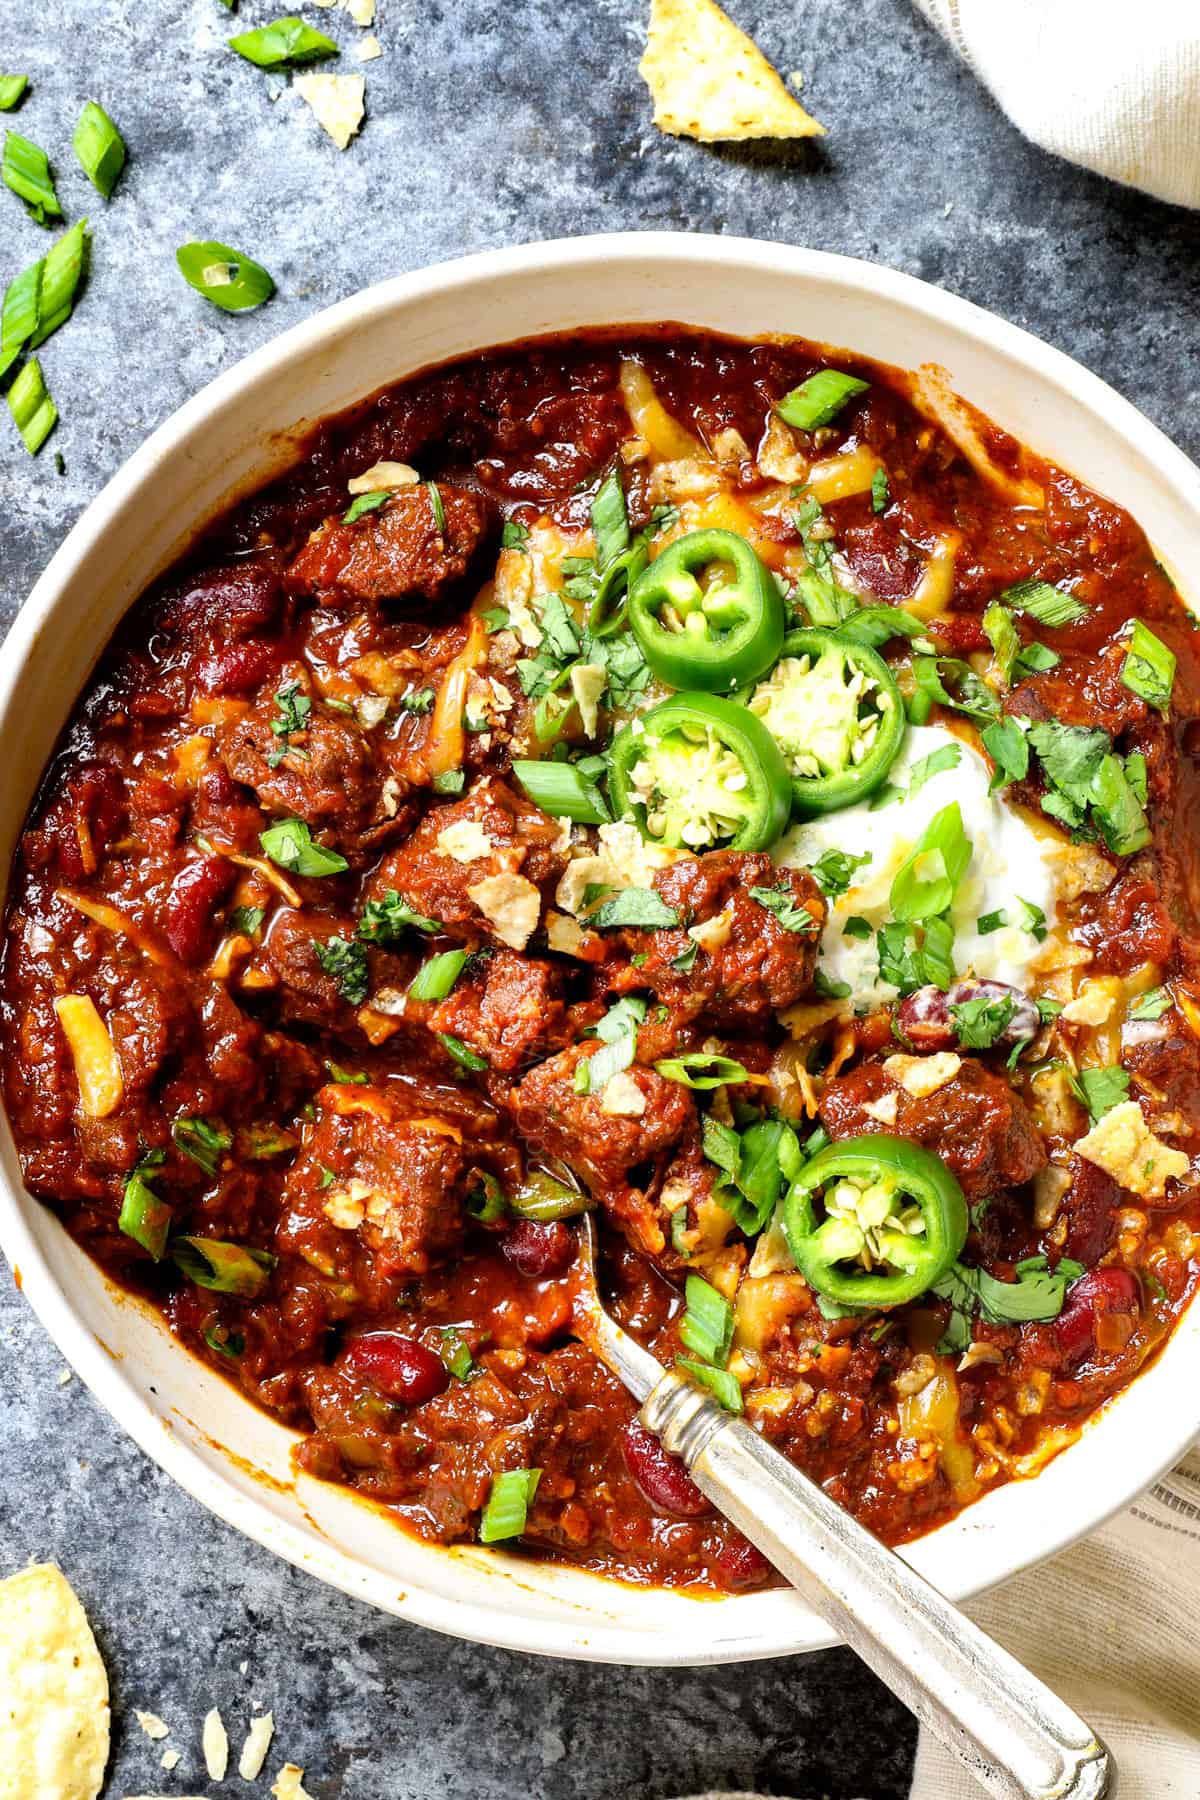 https://carlsbadcravings.com/wp-content/uploads/2023/10/Chili-Con-Carne-2a.jpg